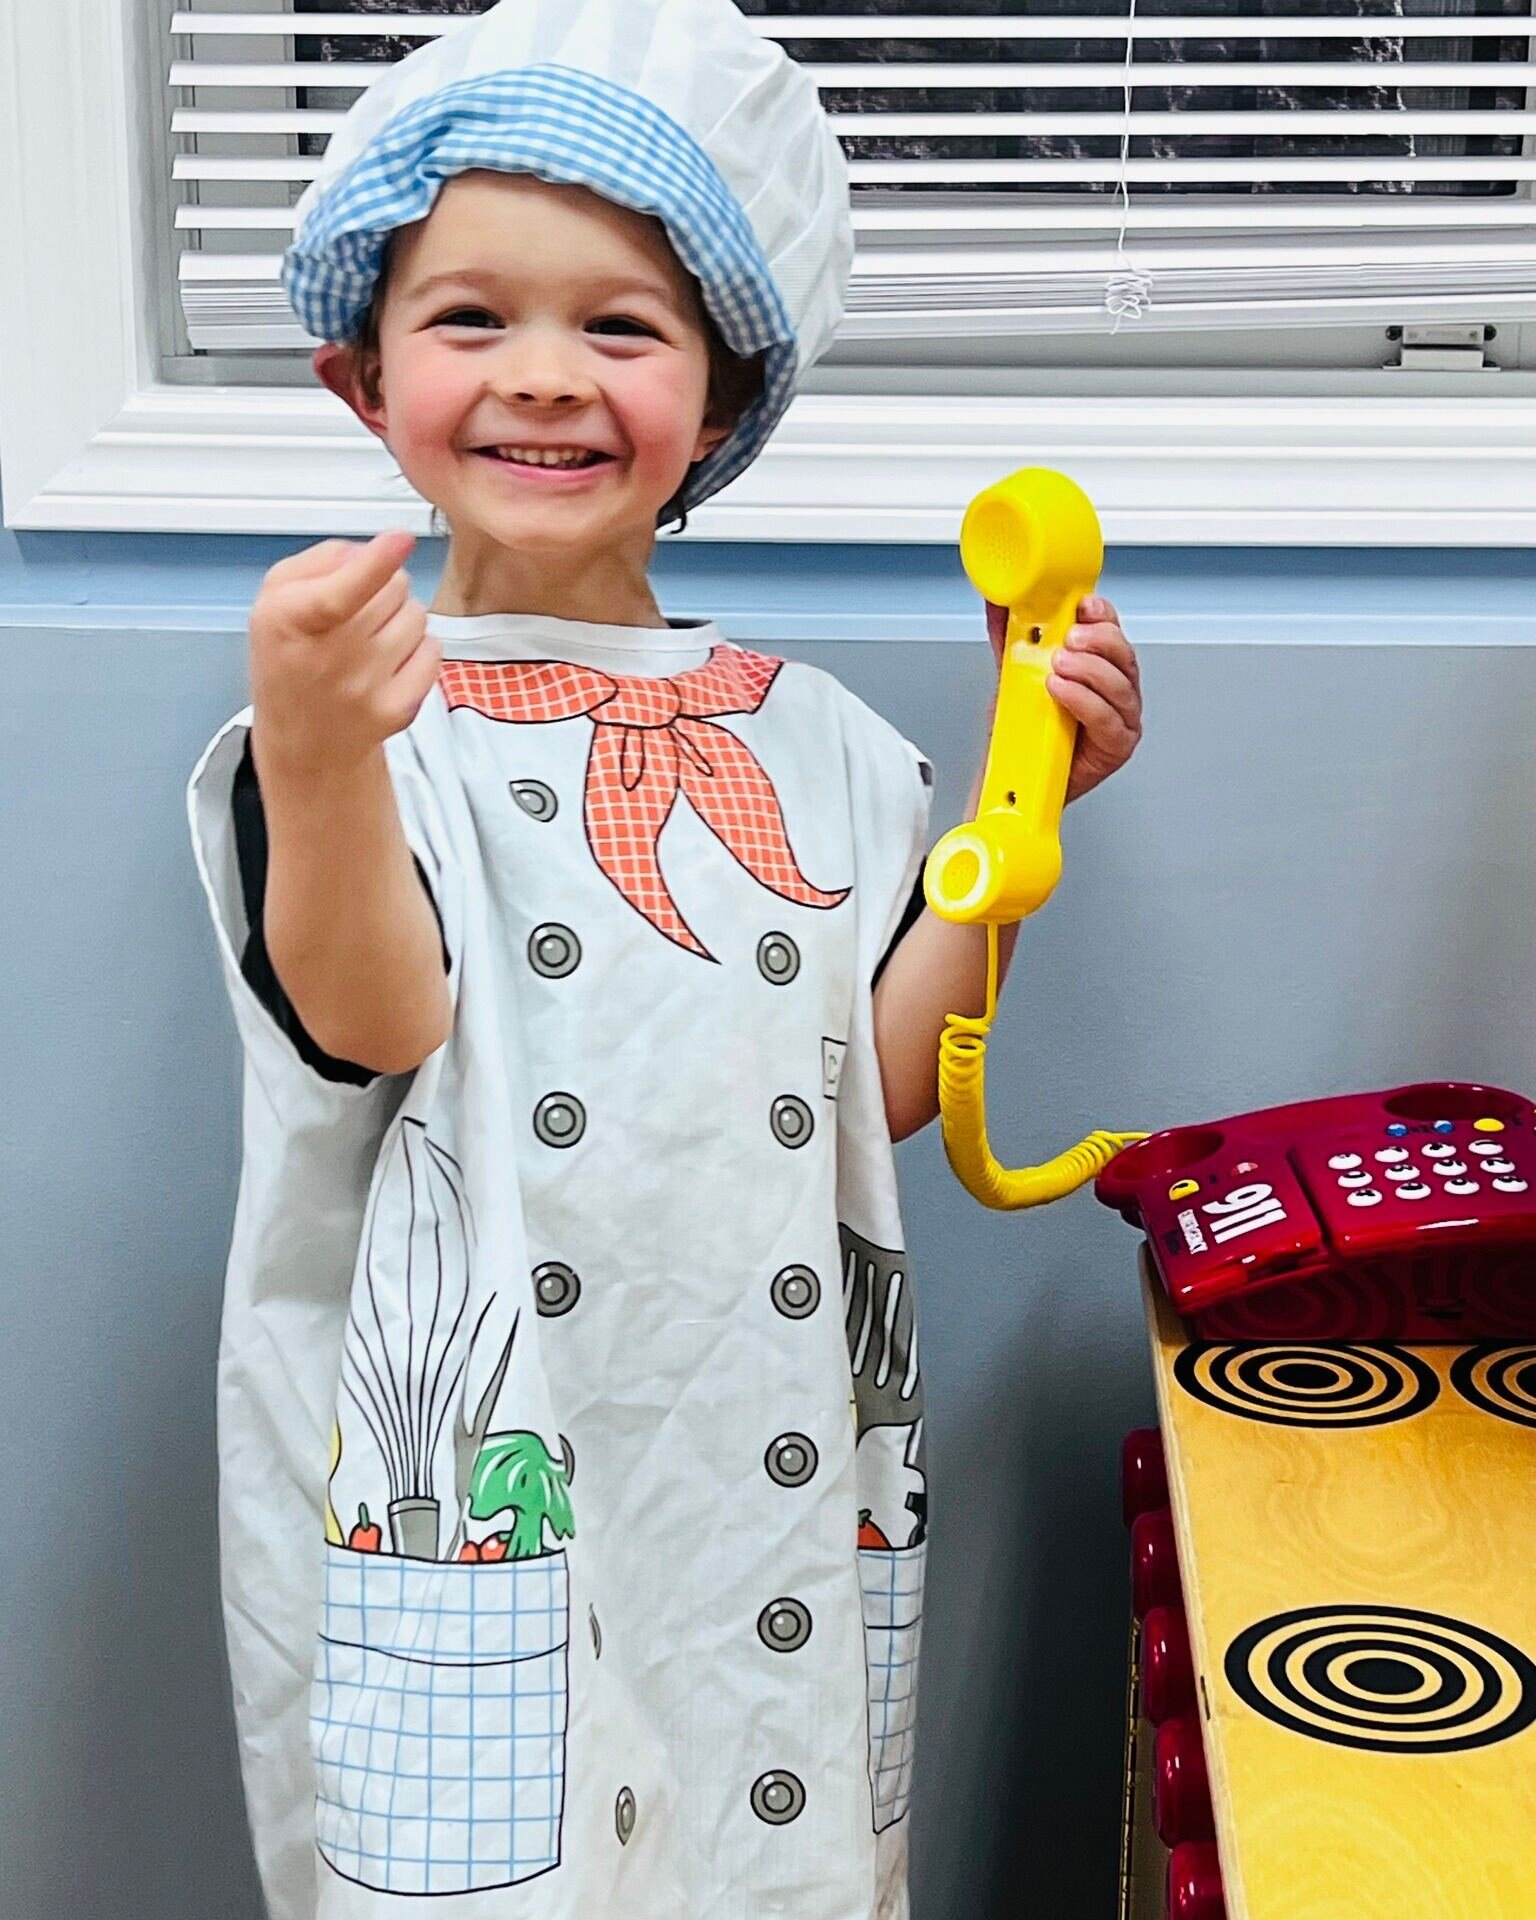 Through pretend play, children learn to do things like negotiate and consider others' perspectives ✨ Dramatic play is one of our favorite activities every day!

#CCC